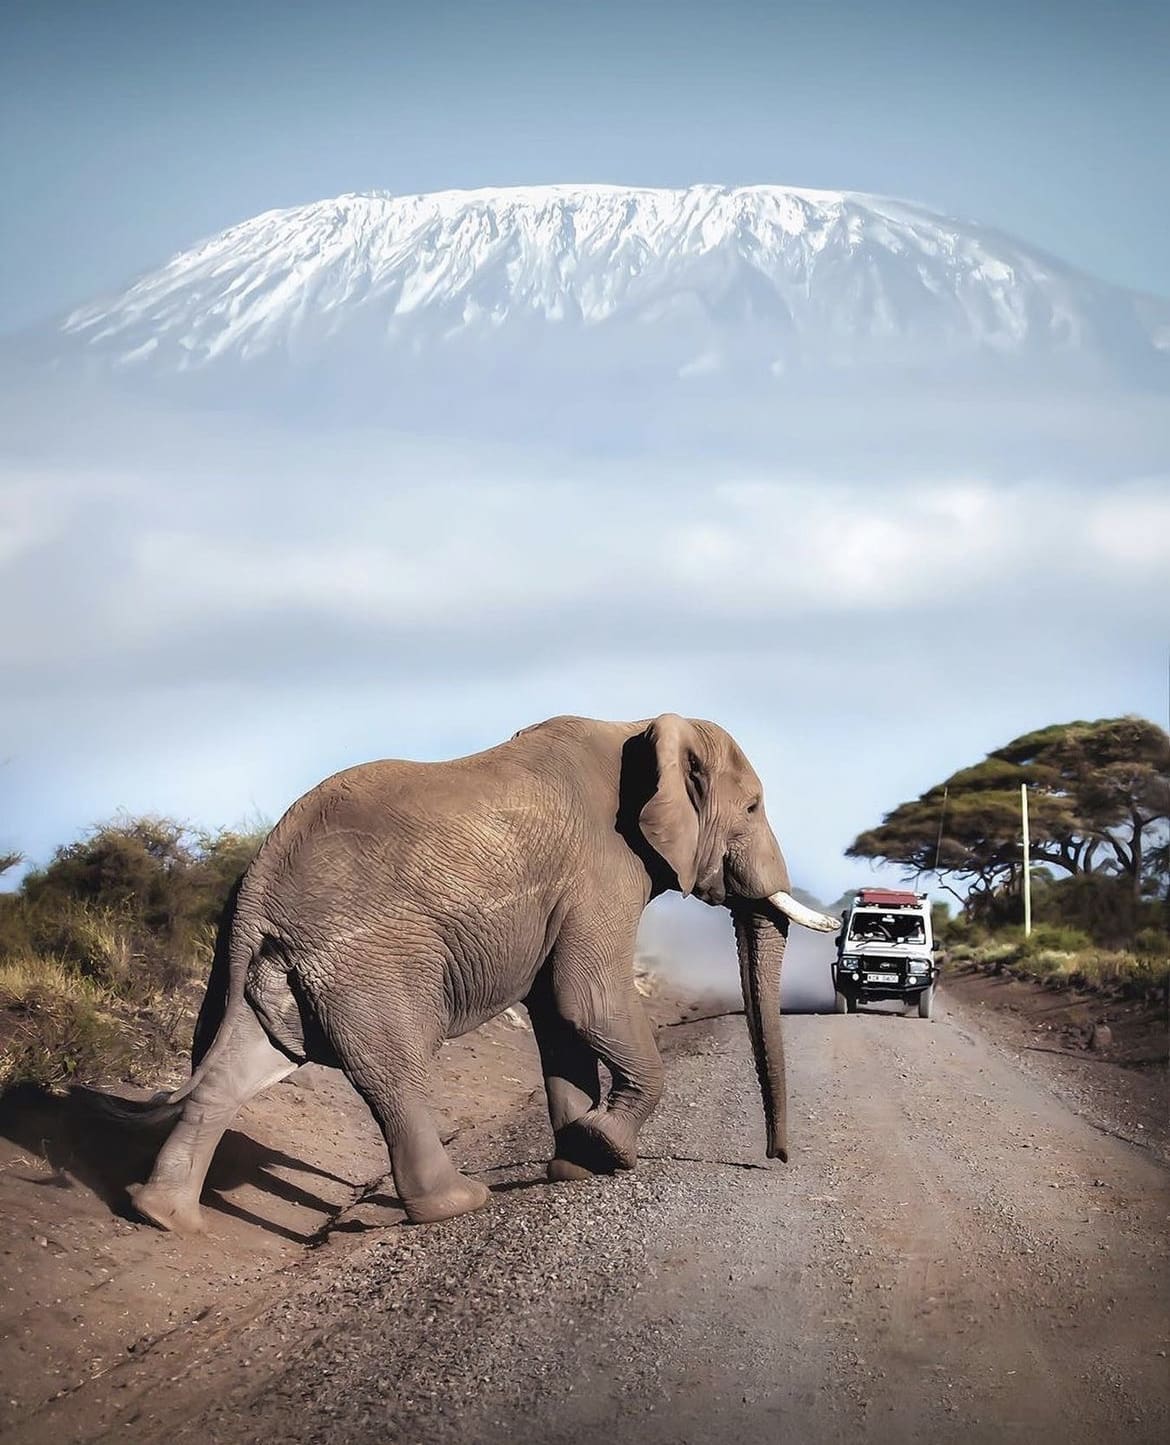 Large Bull Elephant walks in the road in the shadow of Mount Kilimanjaro